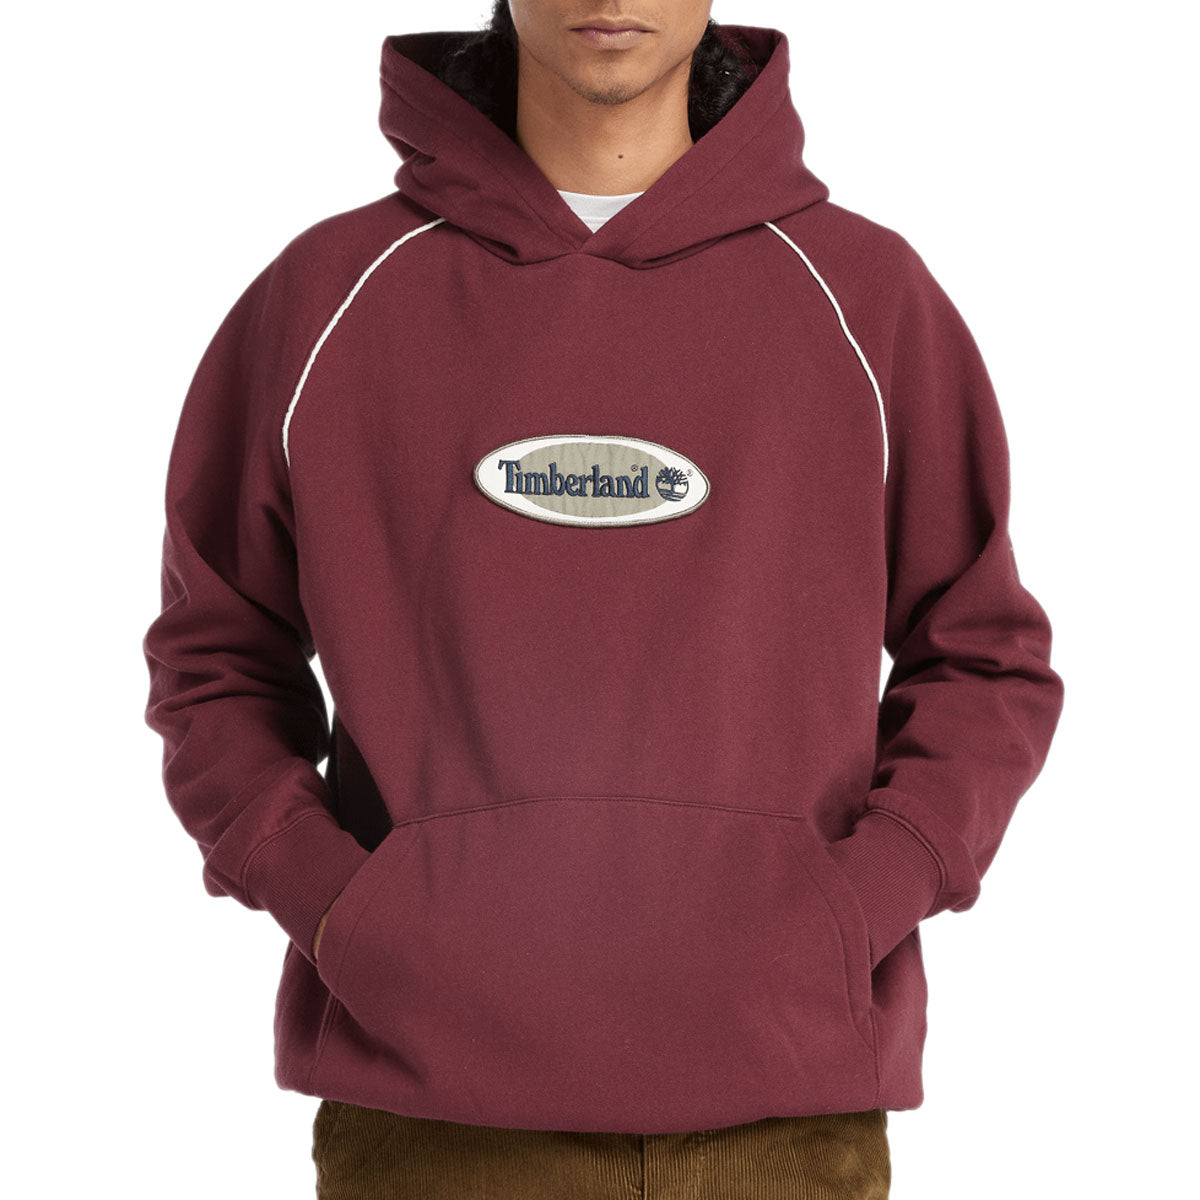 Timberland Oval Logo Patch Hoodie - Port Royale image 1